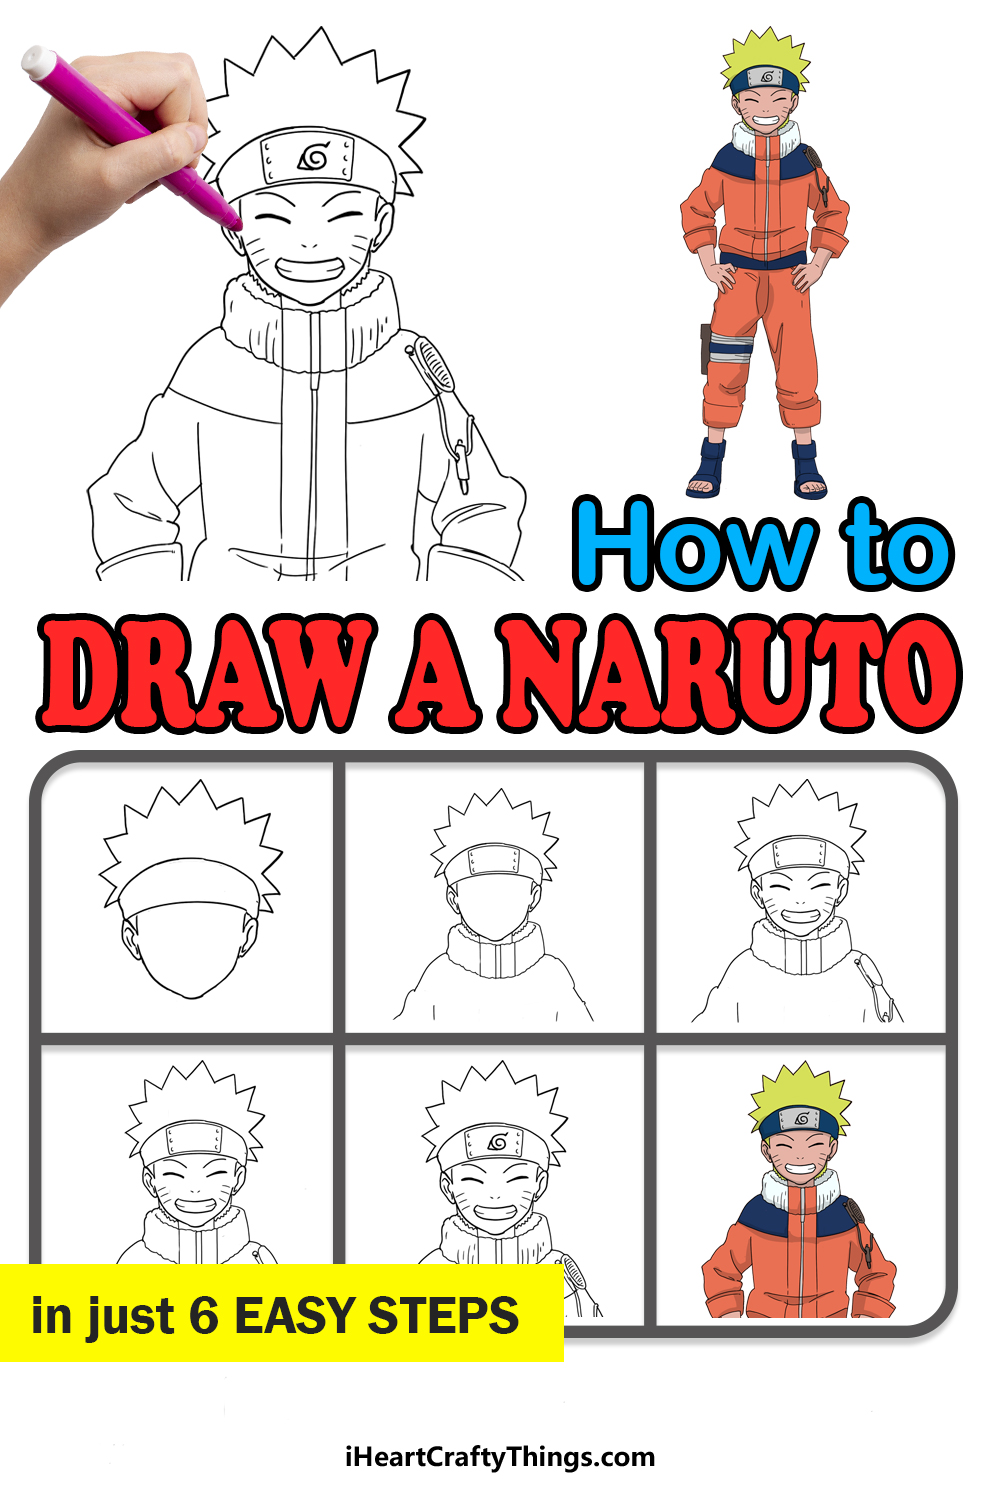 How to Draw Naruto step by step guide